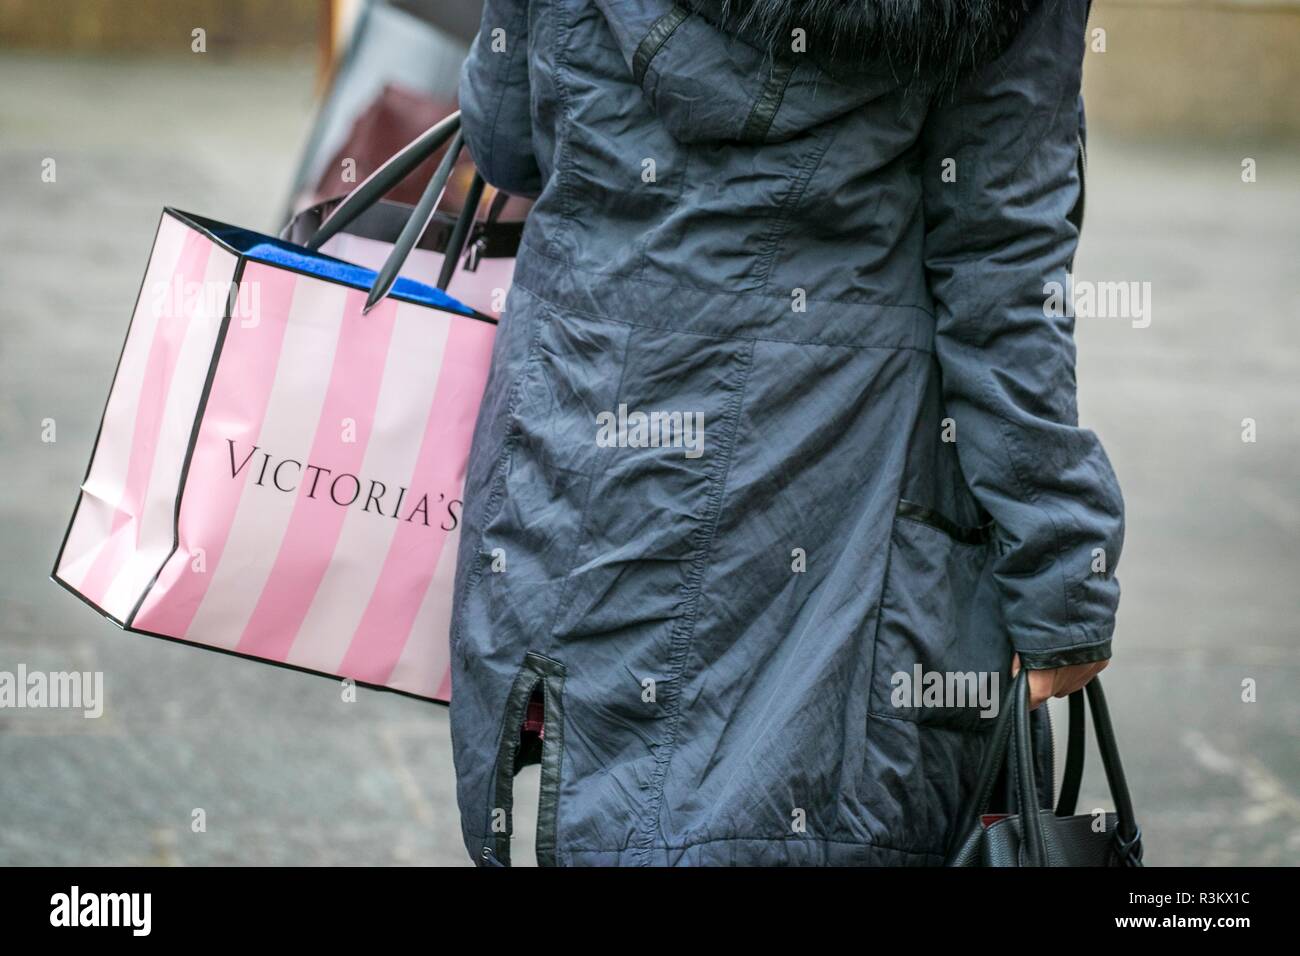 Victorias secret bag hi-res stock photography and images - Alamy